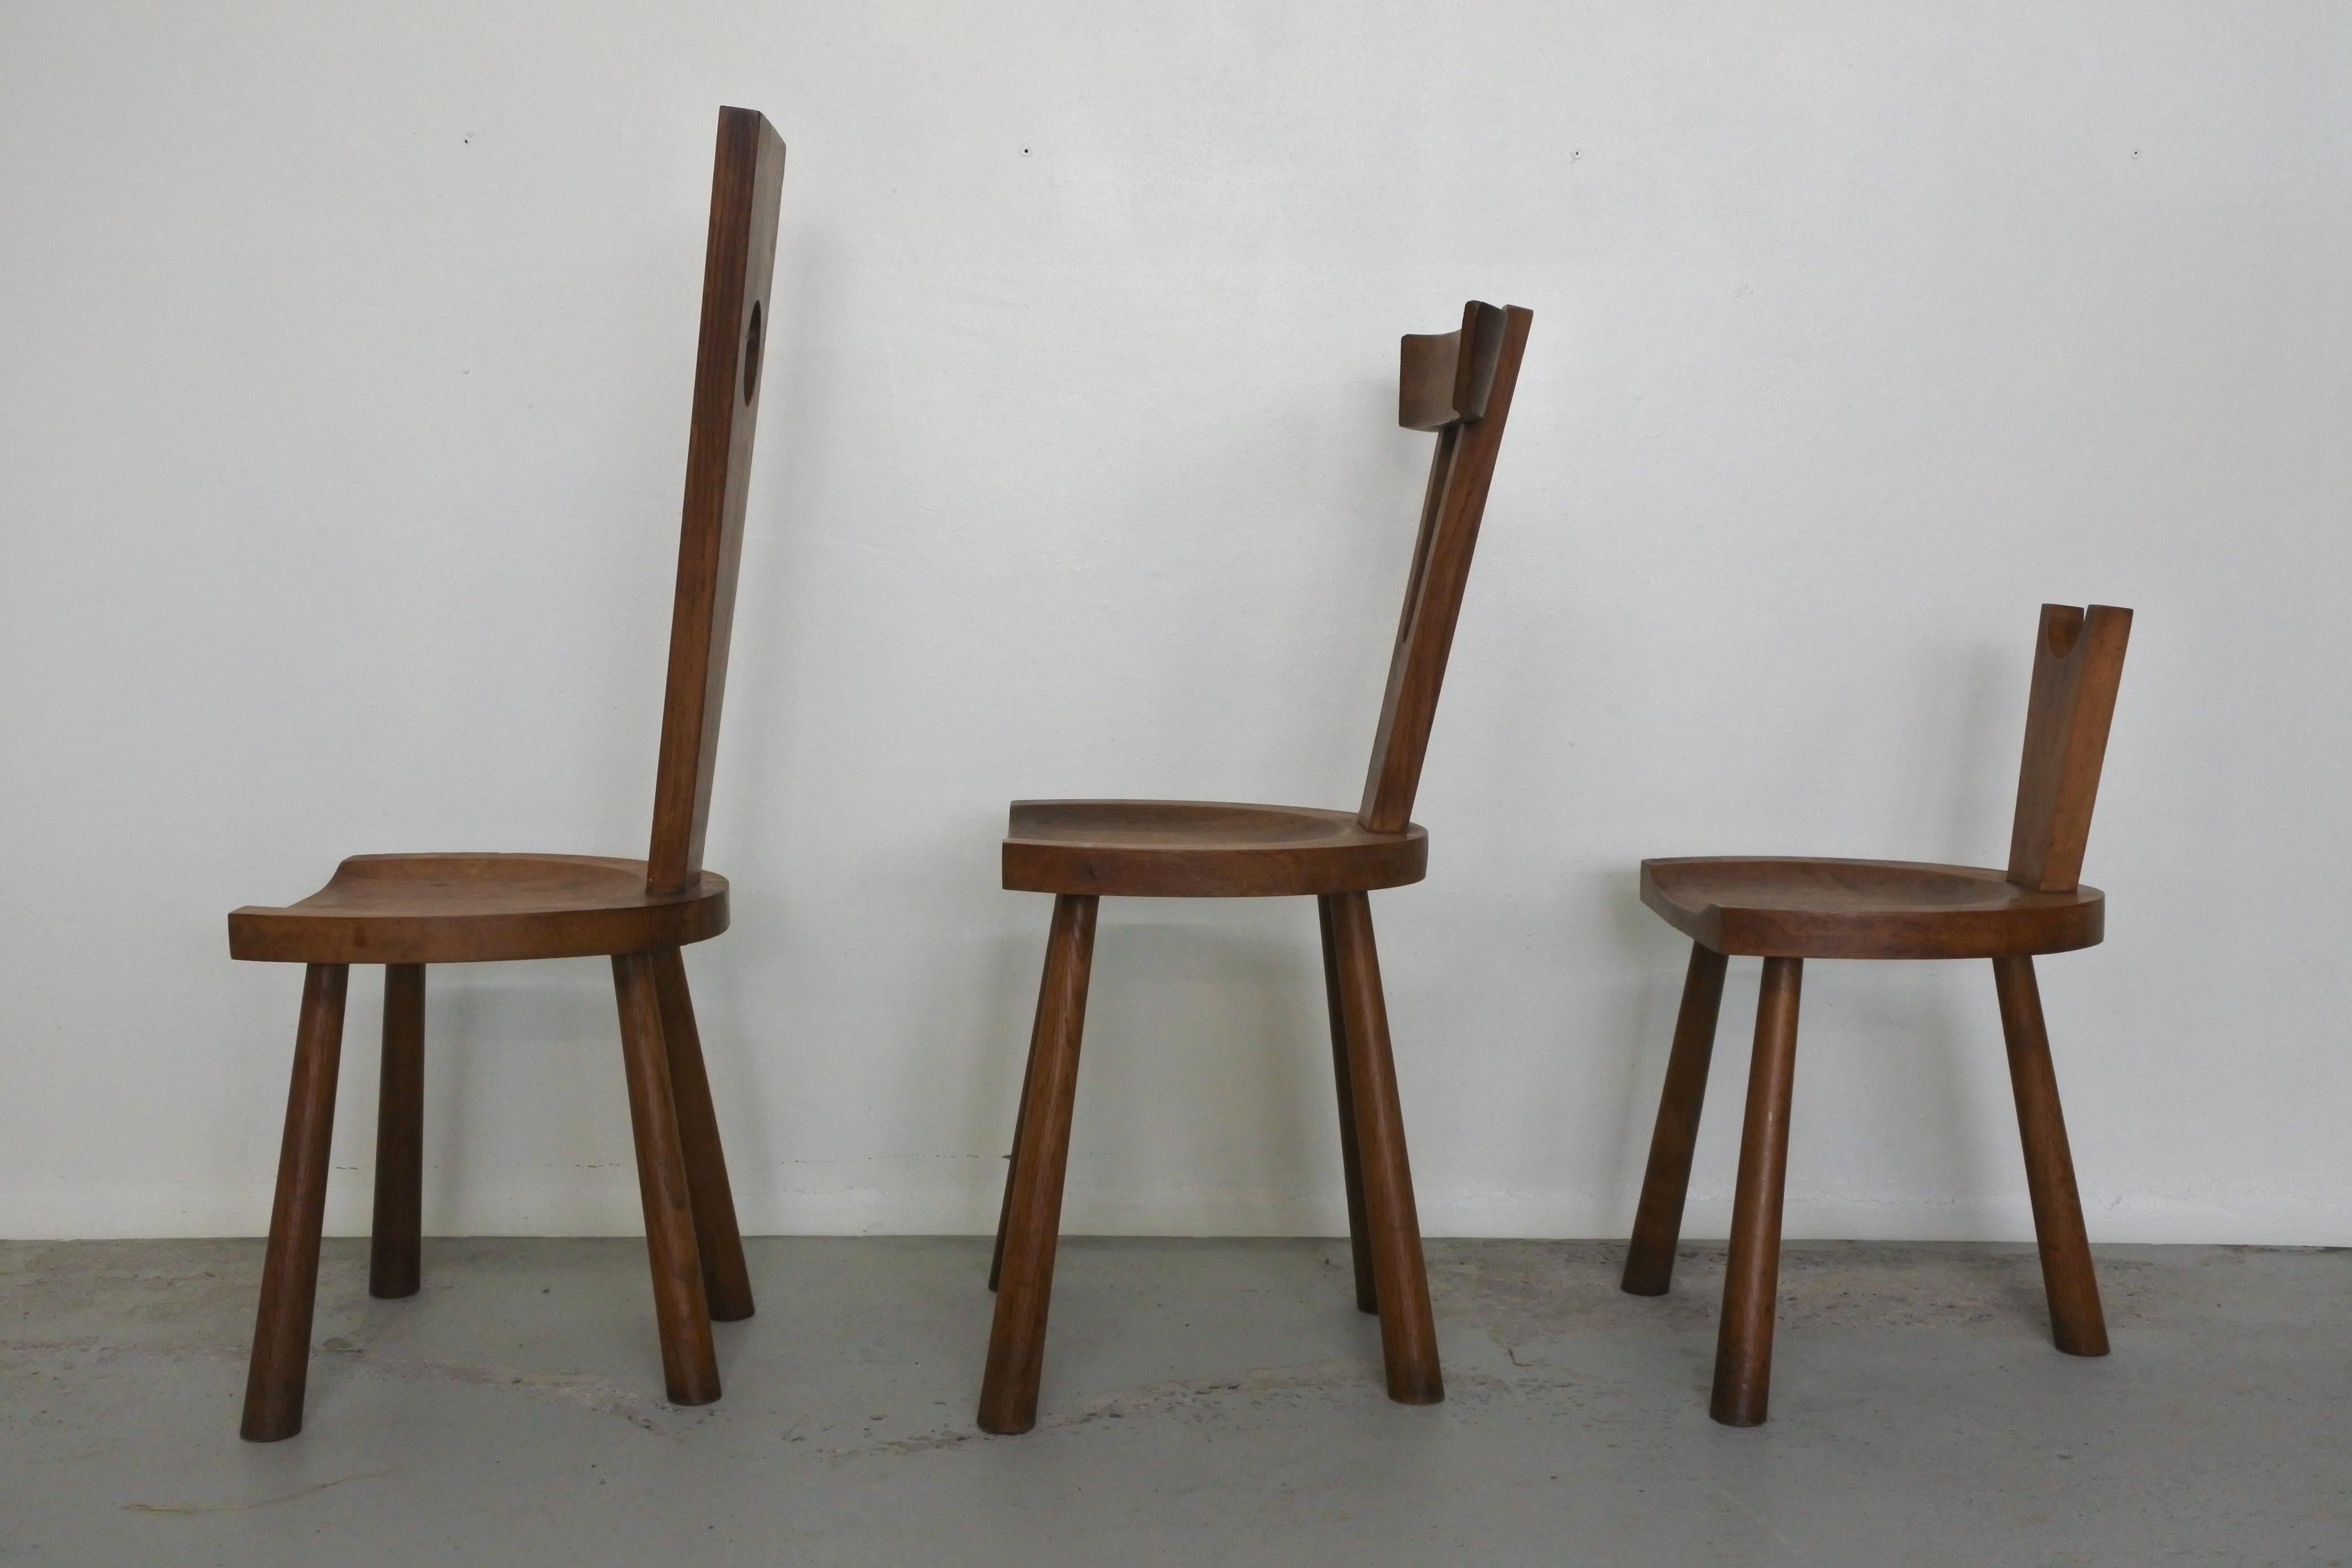 Set of 3 woodworker's studio chairs.
Solid oakwood.
Made in France in the 1950s.

Very sculptural.

Measurements:
Tall: Height 96 cm, depth 40 cm, width 40 cm, seat height 38
Medium: Height 83 cm, depth 40 cm, width 40 cm, seat height